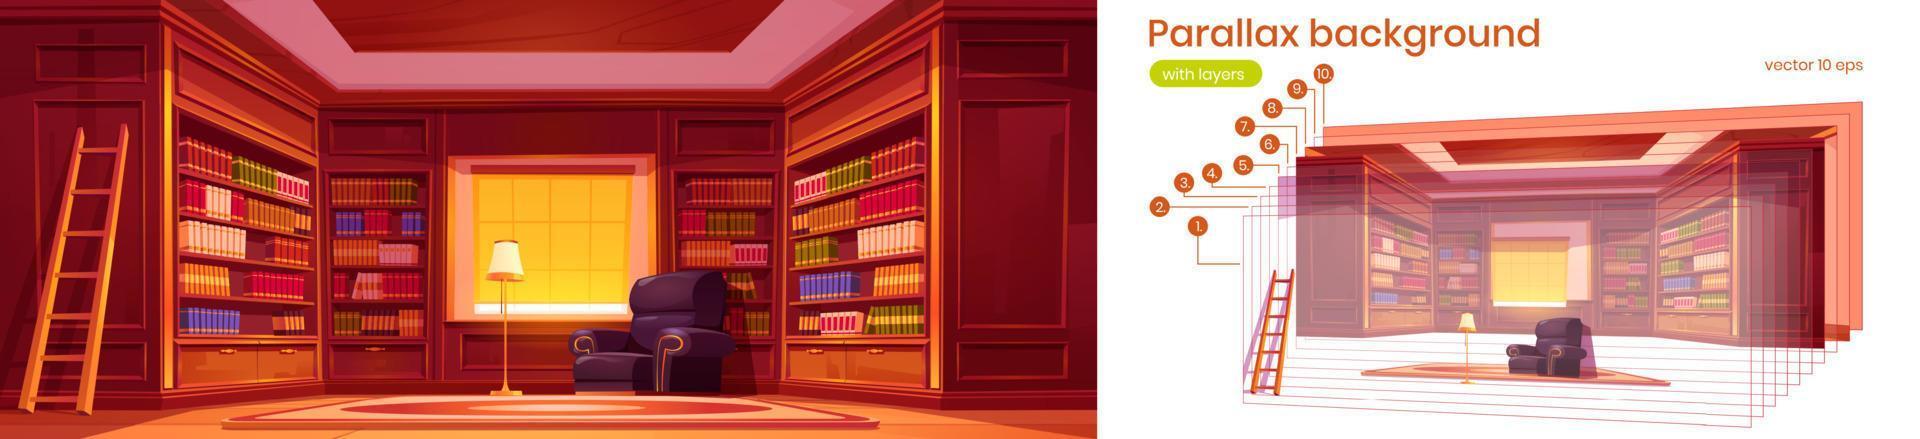 Parallax background with library interior vector